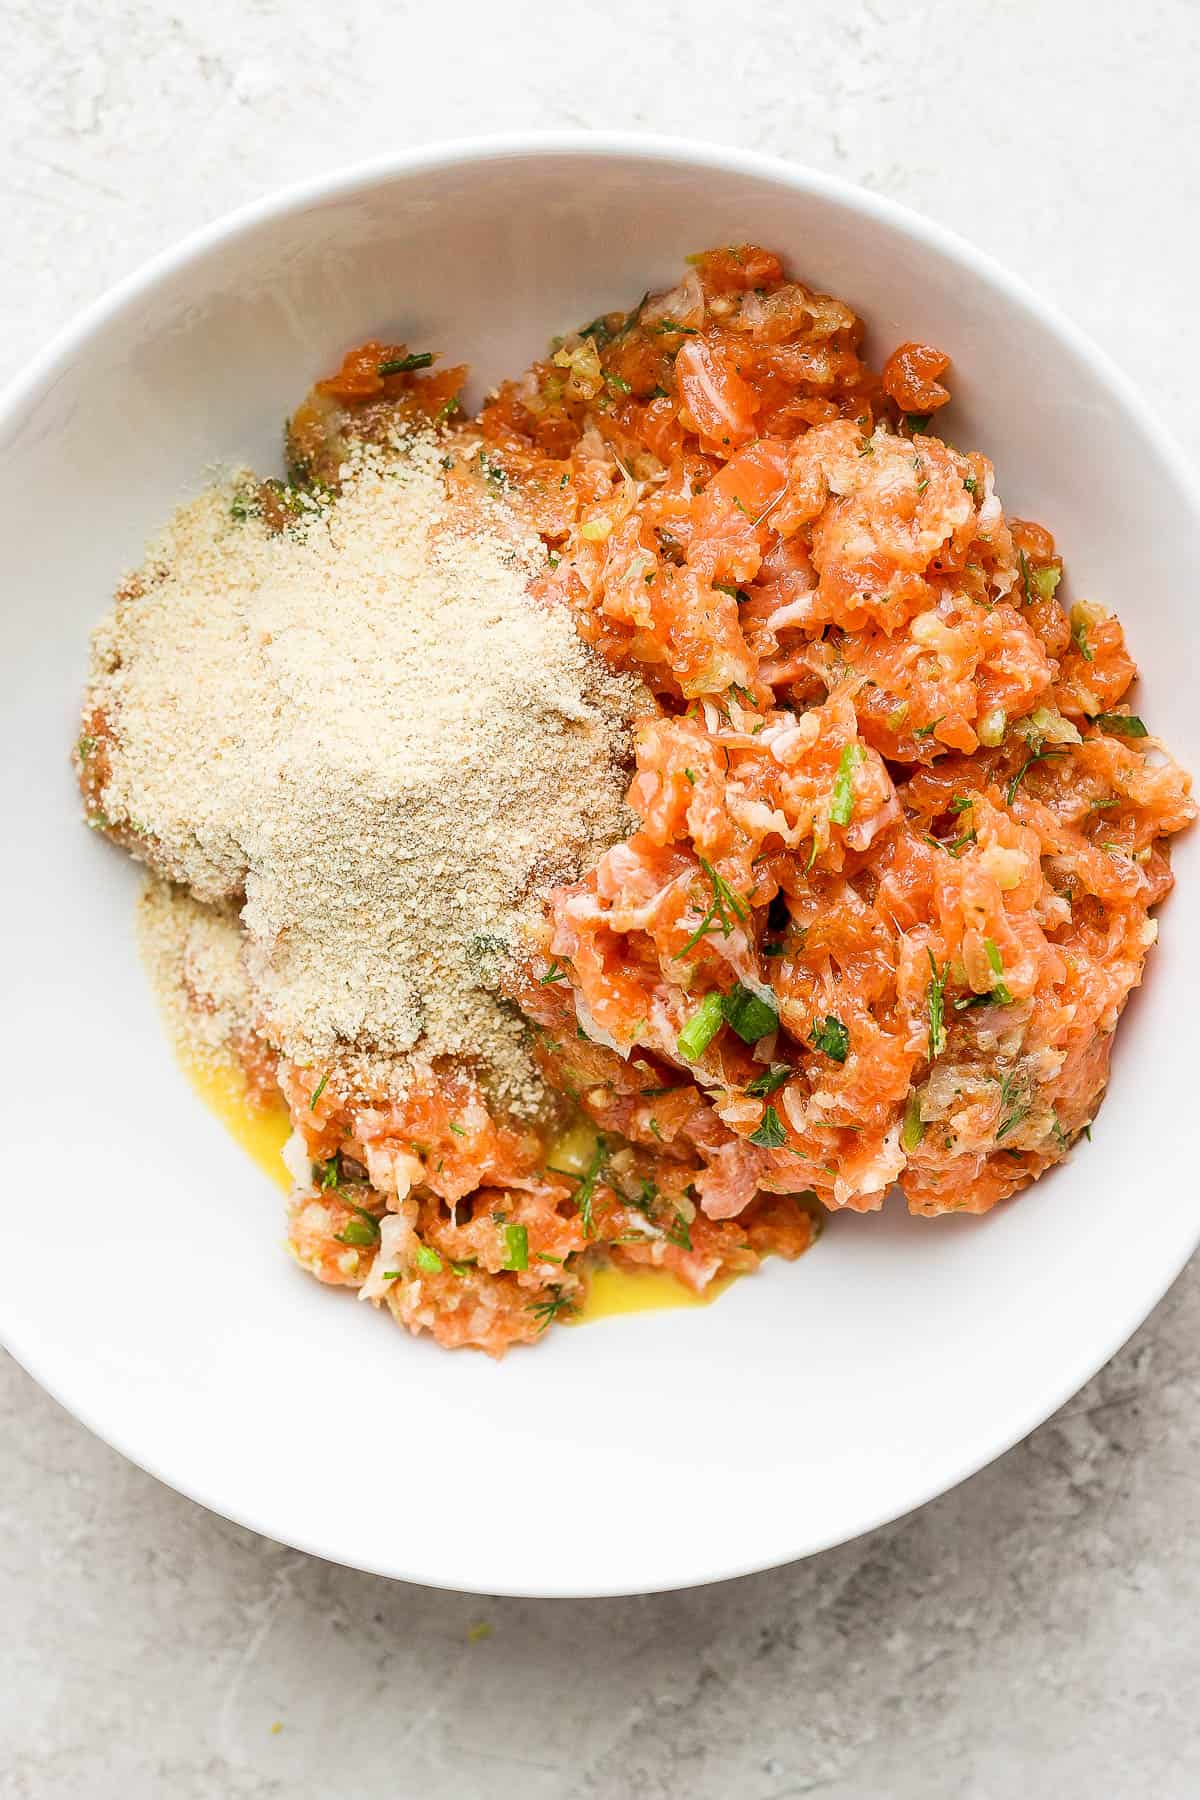 Salmon mixture in a bowl with some breadcrumbs.